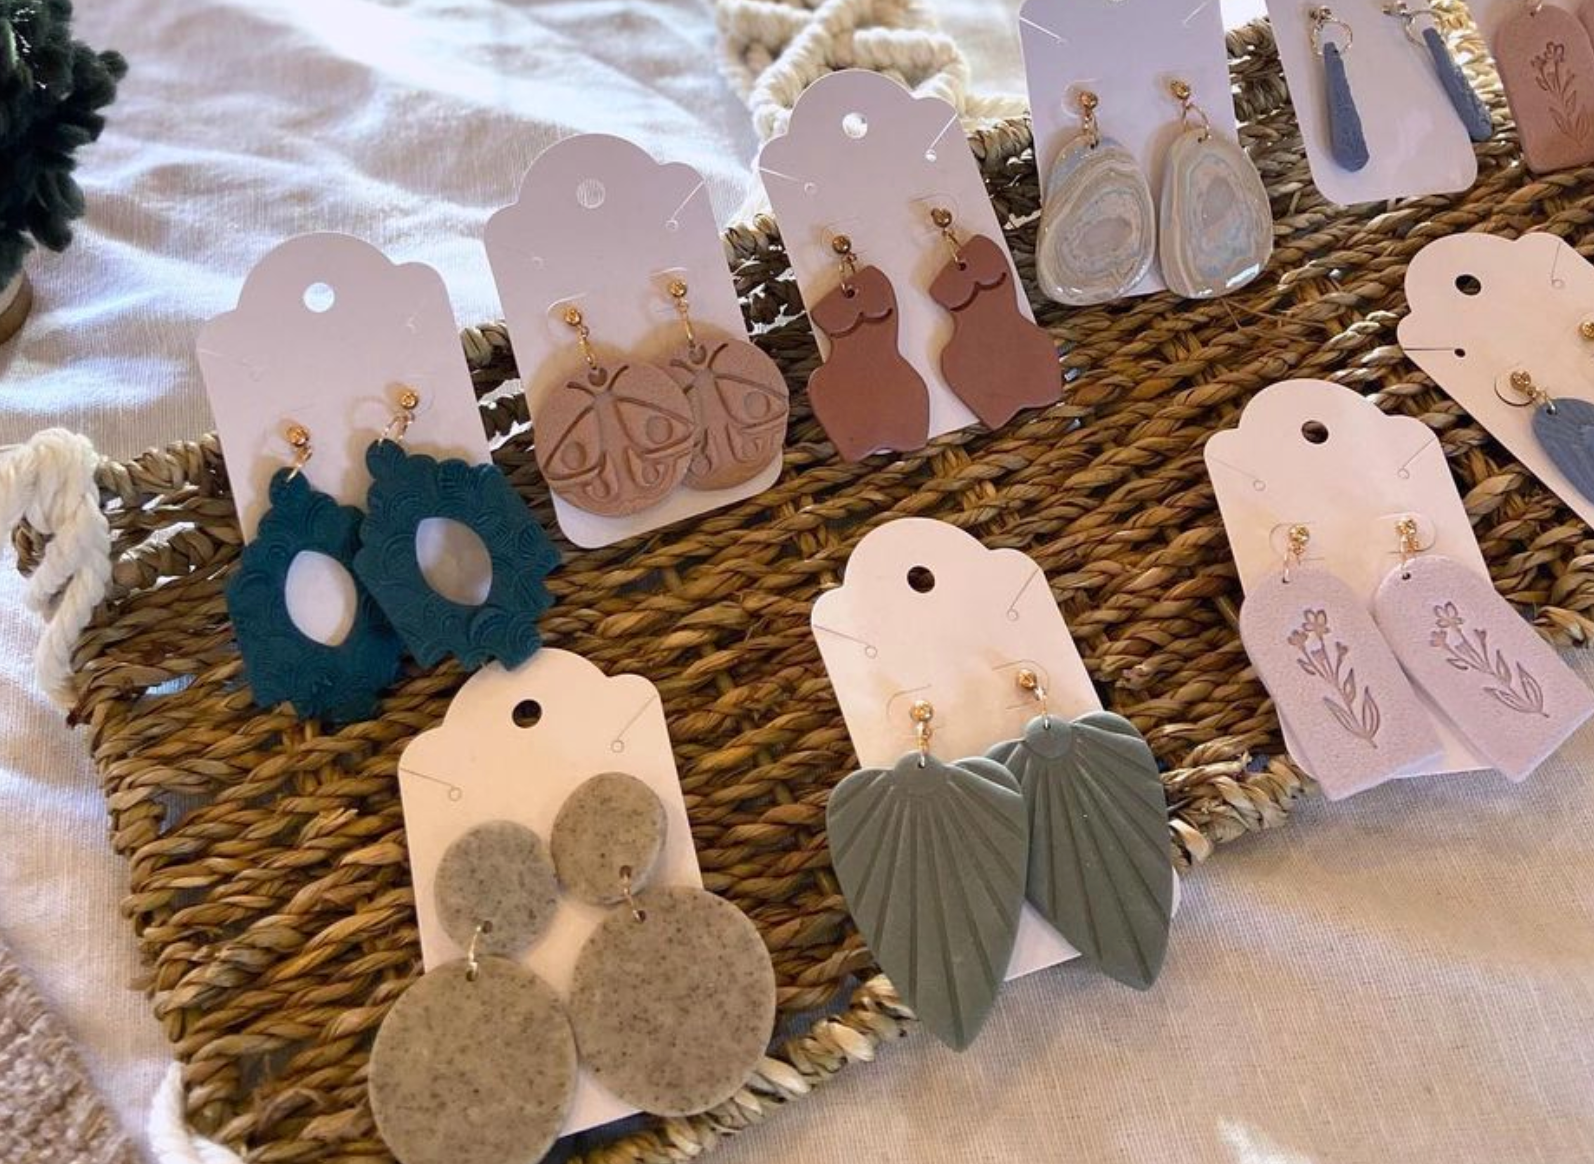 Selection of dangly clay earrings including leaves and floral prints, made by Baewolf Earrings